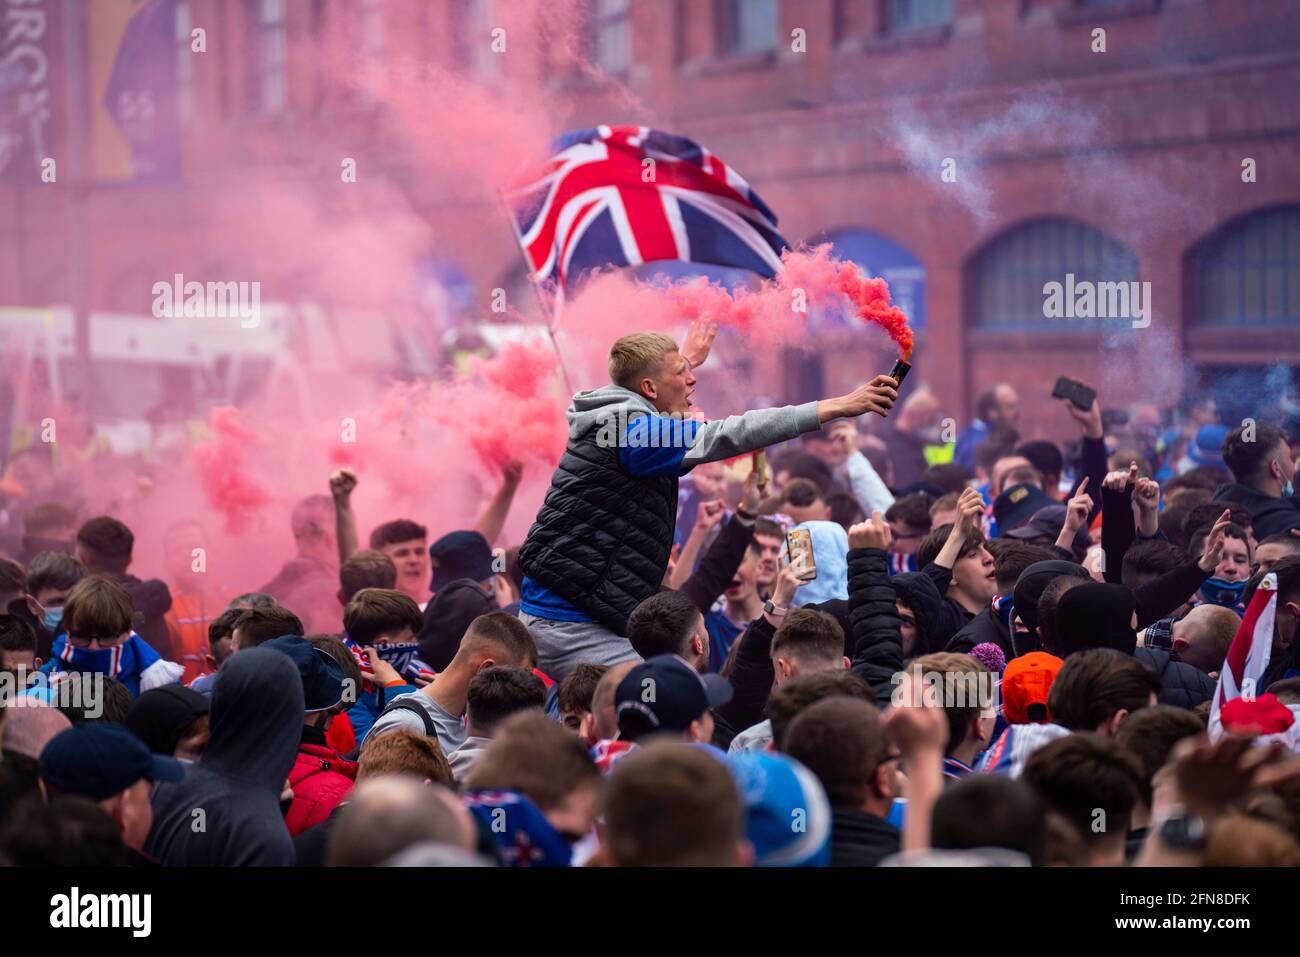 Glasgow, Scotland, UK. 15 May 2021. Thousands of supporters and fans of Rangers football club descend on Ibrox Park in Glasgow to celebrate winning the Scottish Premiership championship for the 55nd time and the first time for 10 years. Smoke bombs and fireworks are being let off by fans tightly controlled by police away from the stadium entrances.Iain Masterton/Alamy Live News Stock Photo